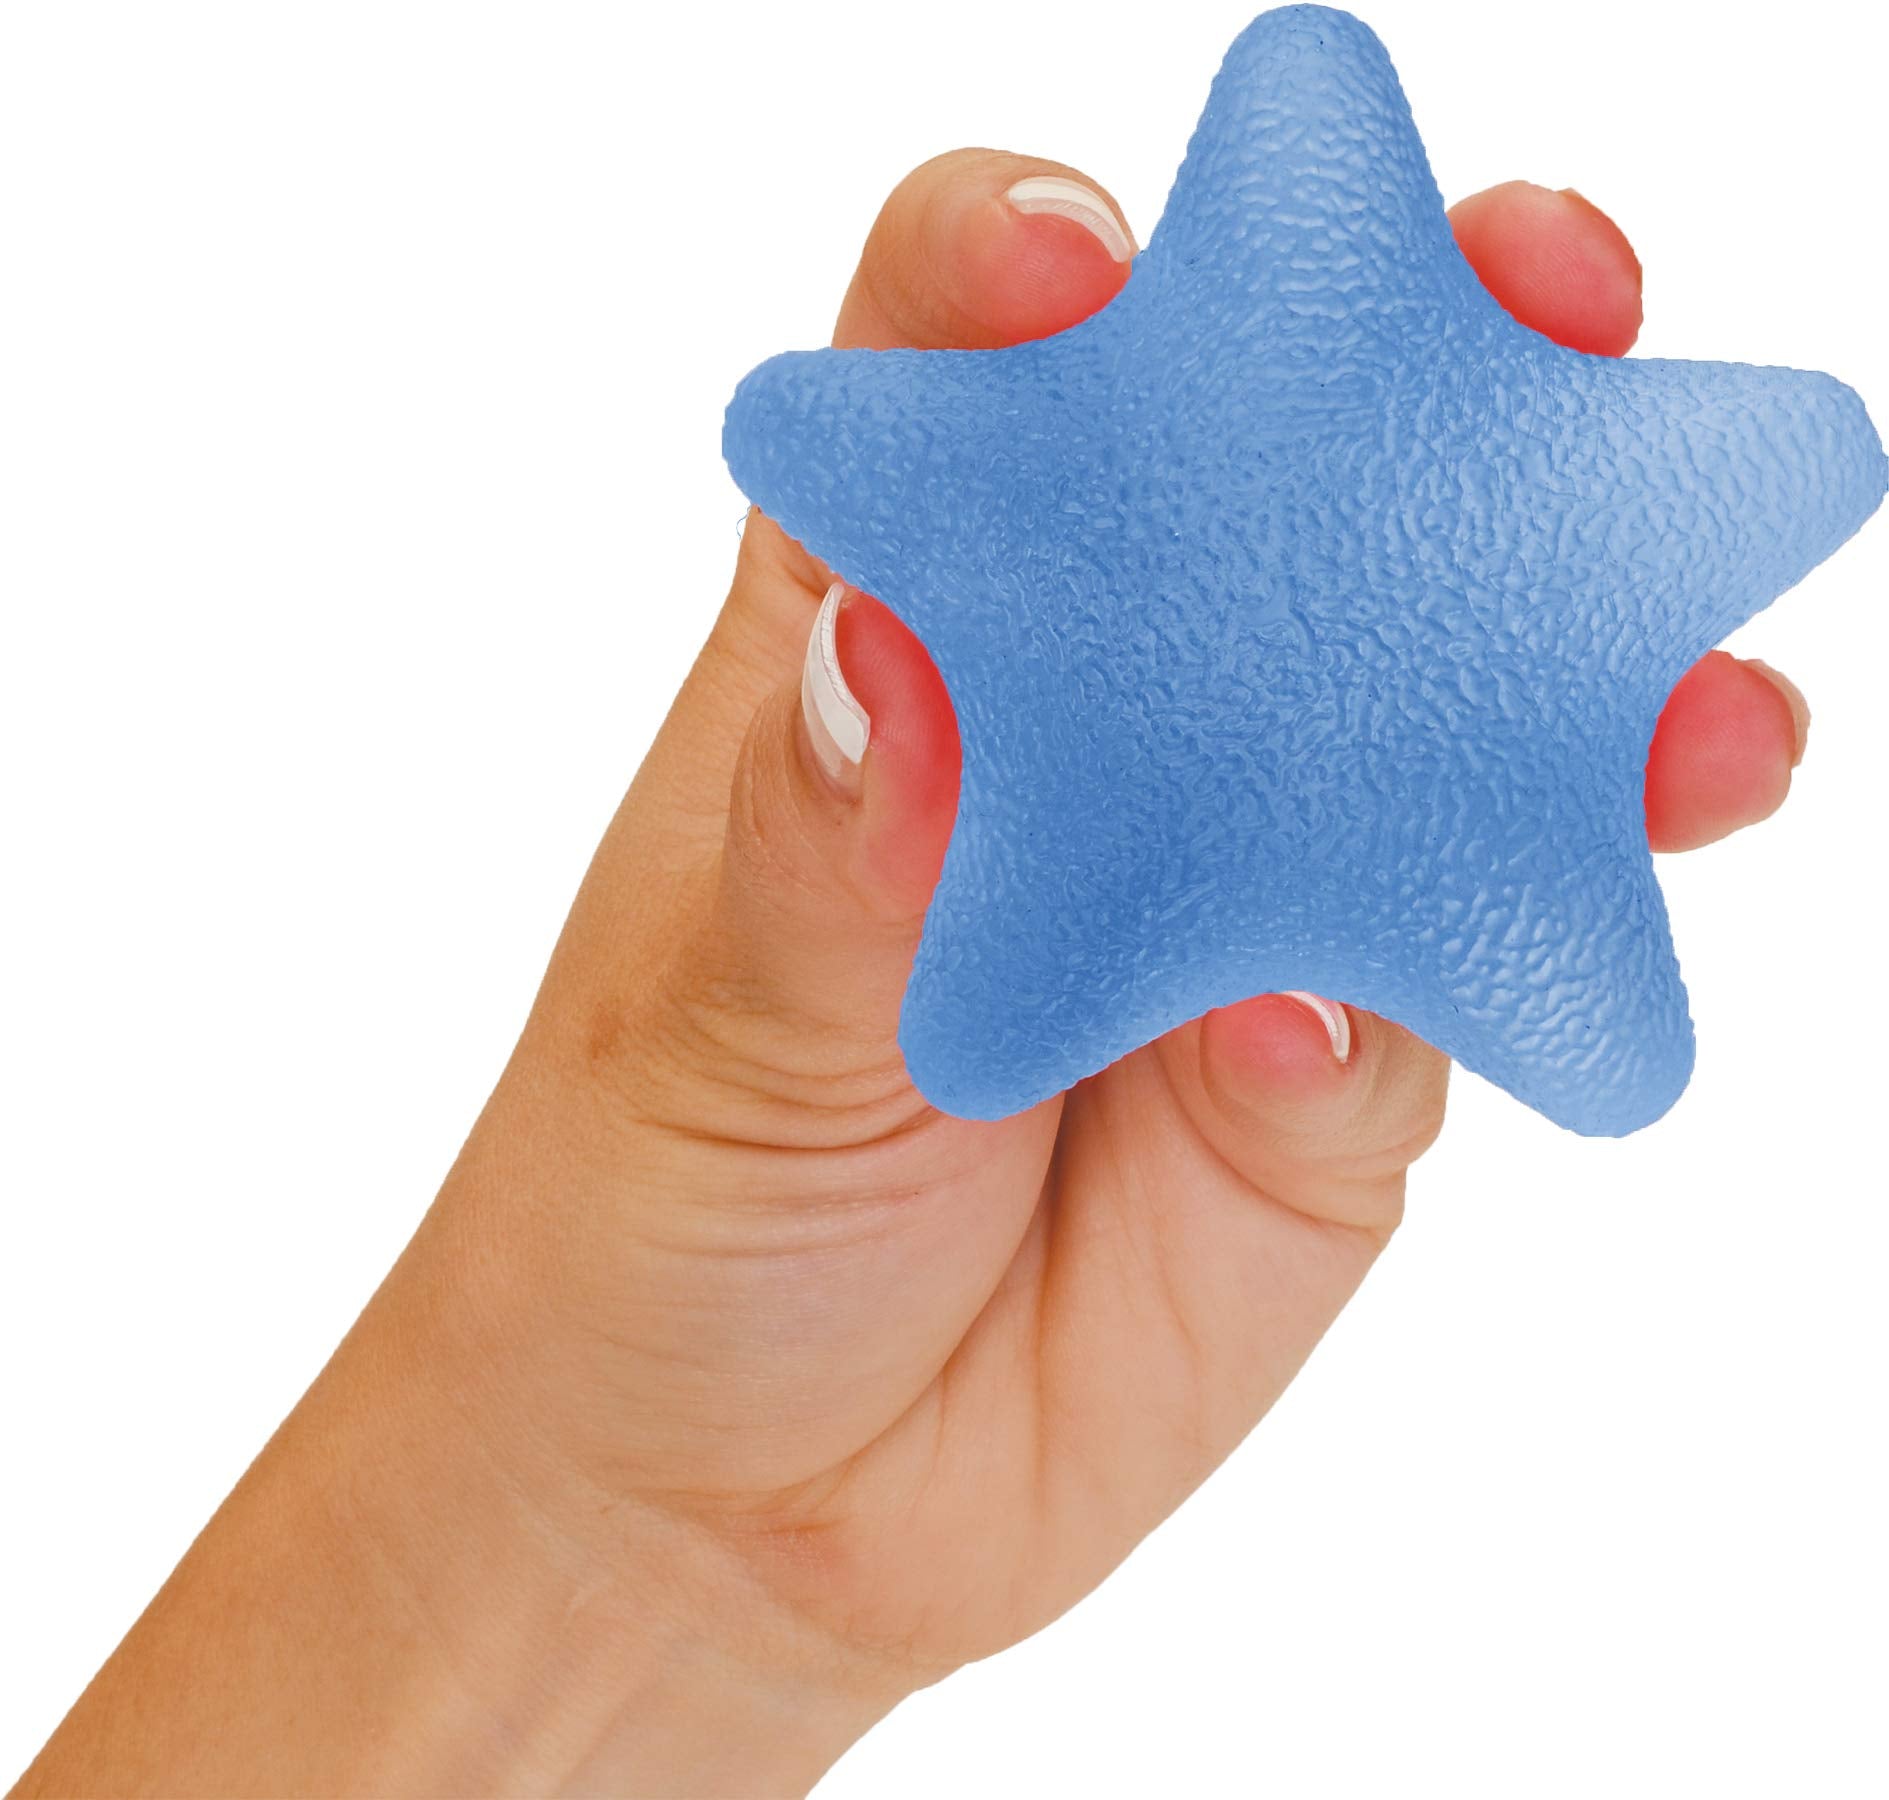 NOVA Hand Exerciser Star, Hand Grip Squeeze Star for Strength, Stress and Recovery, Comes in 3 Resistance Levels - Pink Soft, Orange Medium and Blue Firm